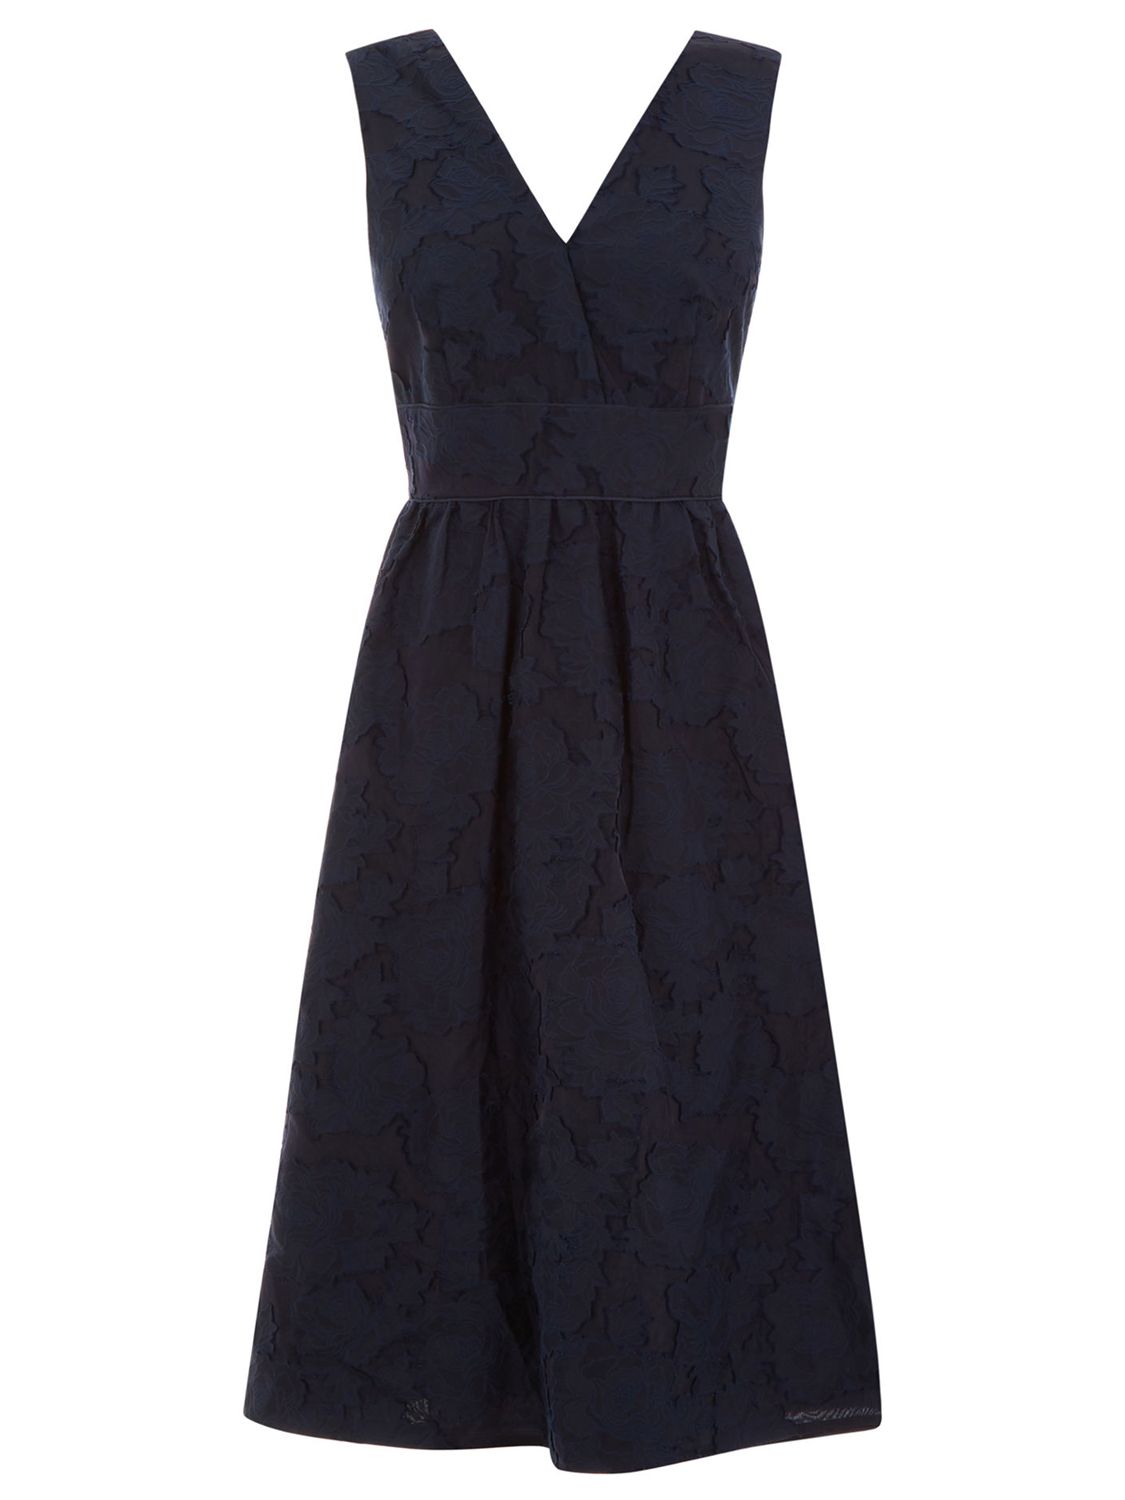 Warehouse Burn Out Prom Dress, Navy